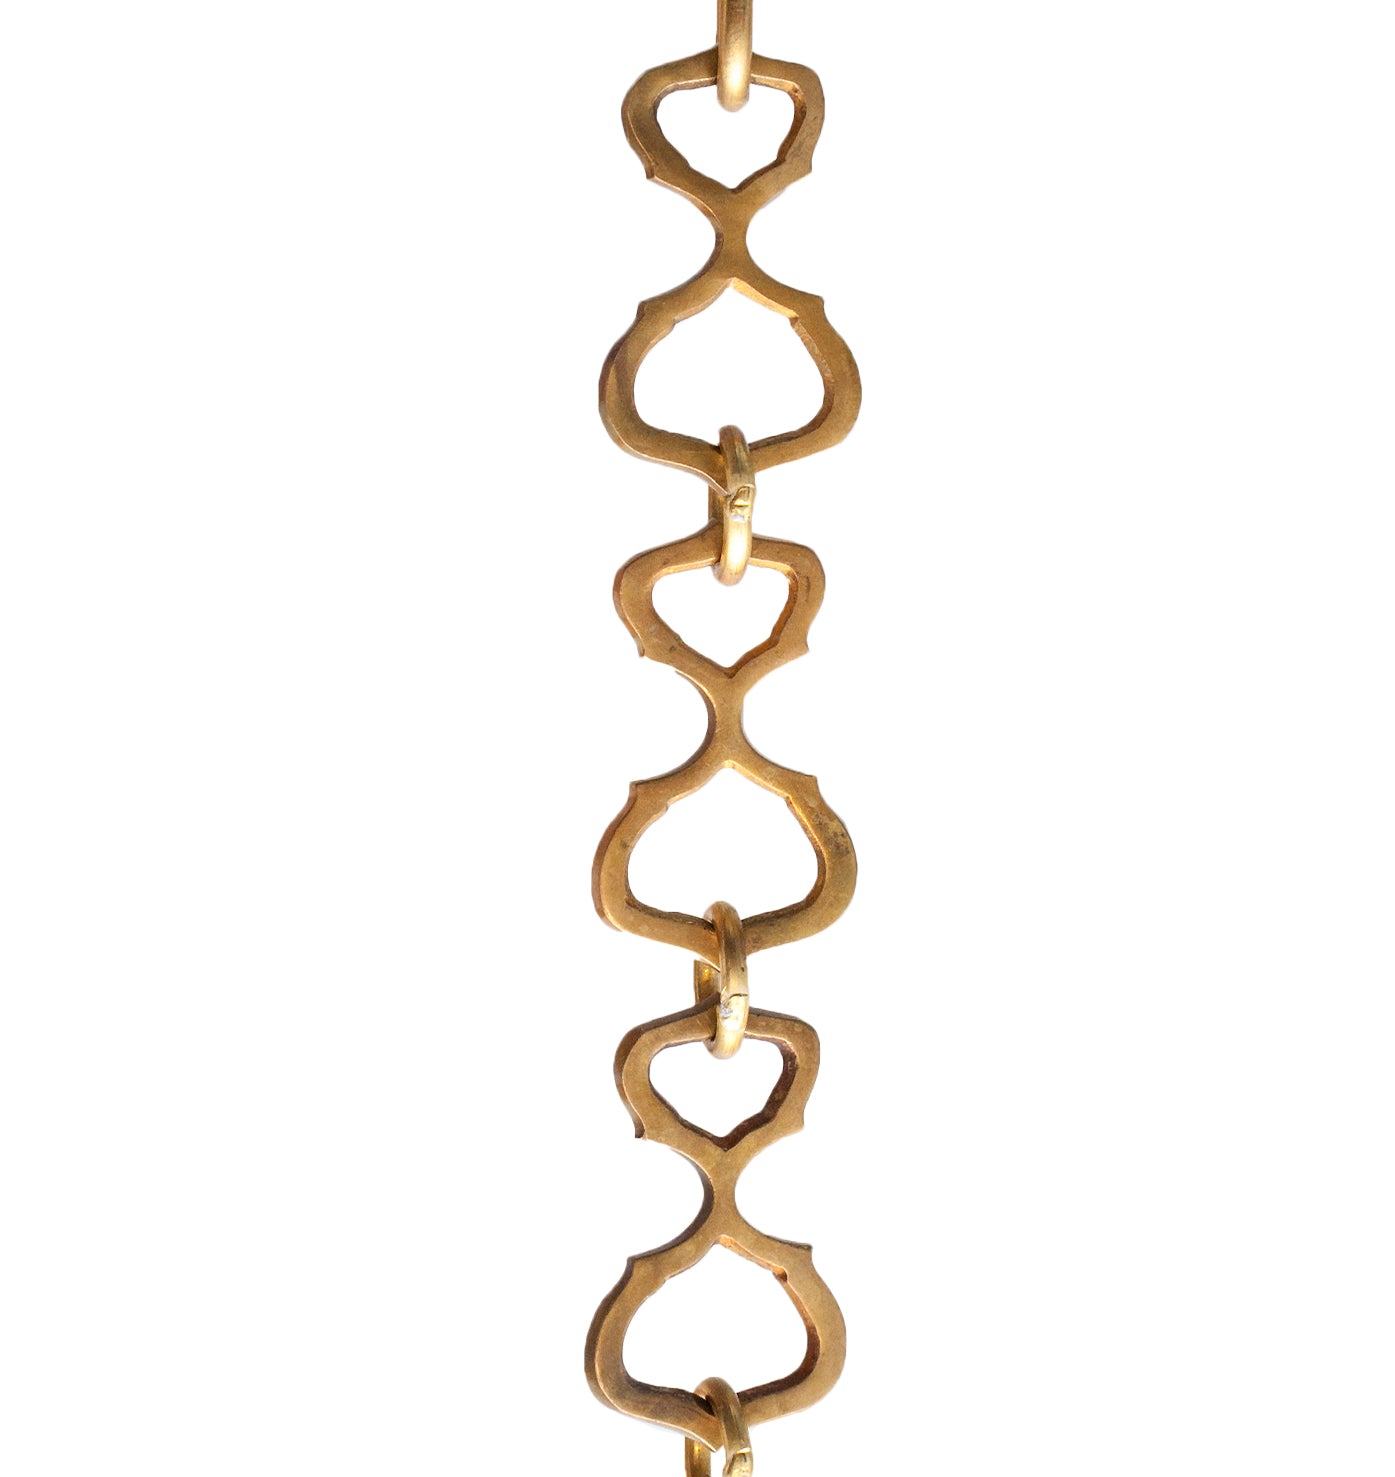 48" RSB Signature Chain - Brass or Nickel